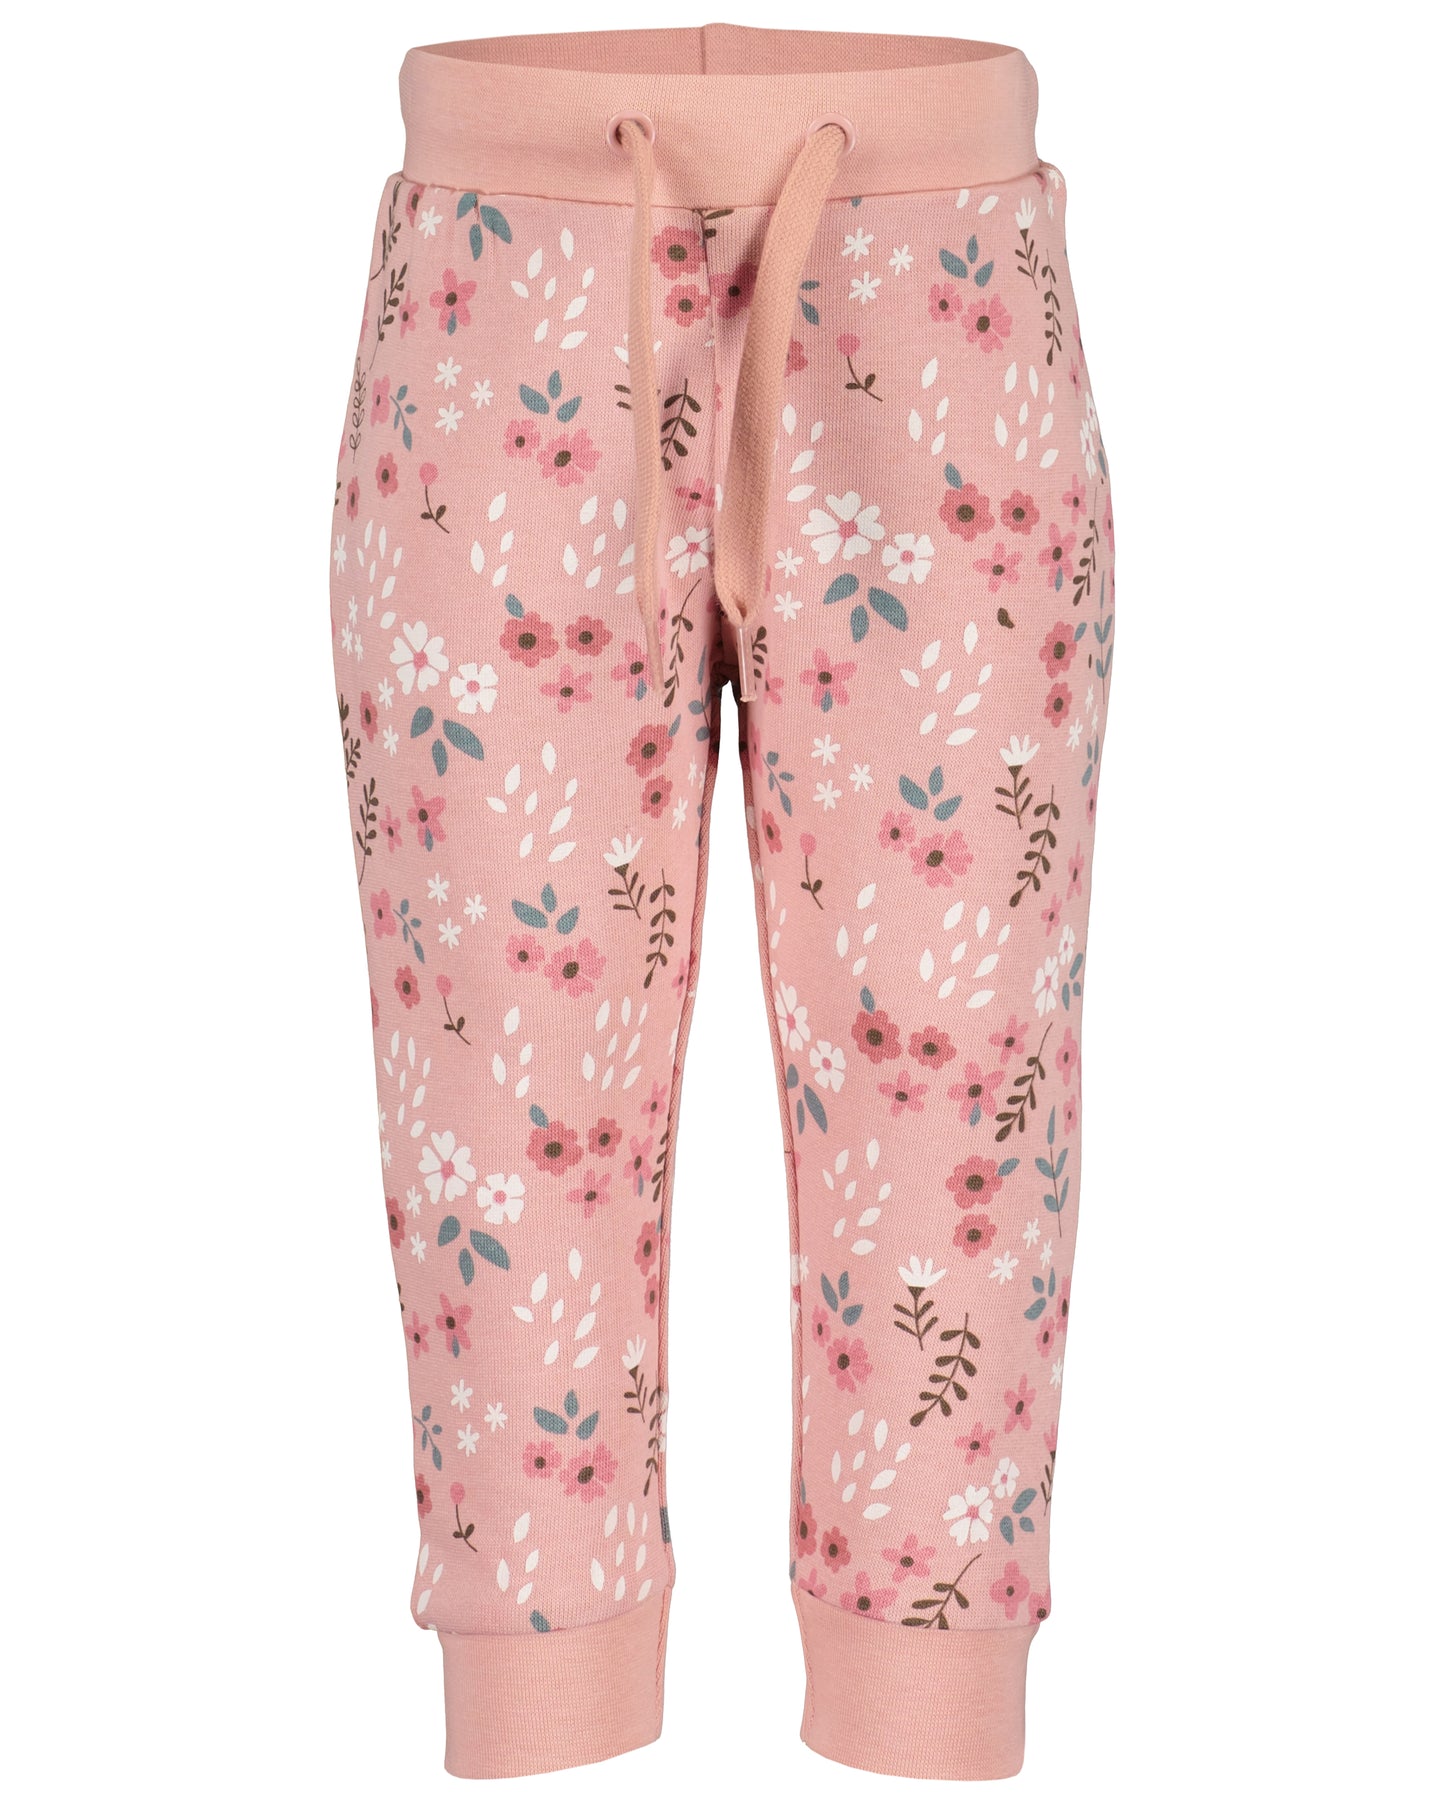 Tractor jumper and flower joggers